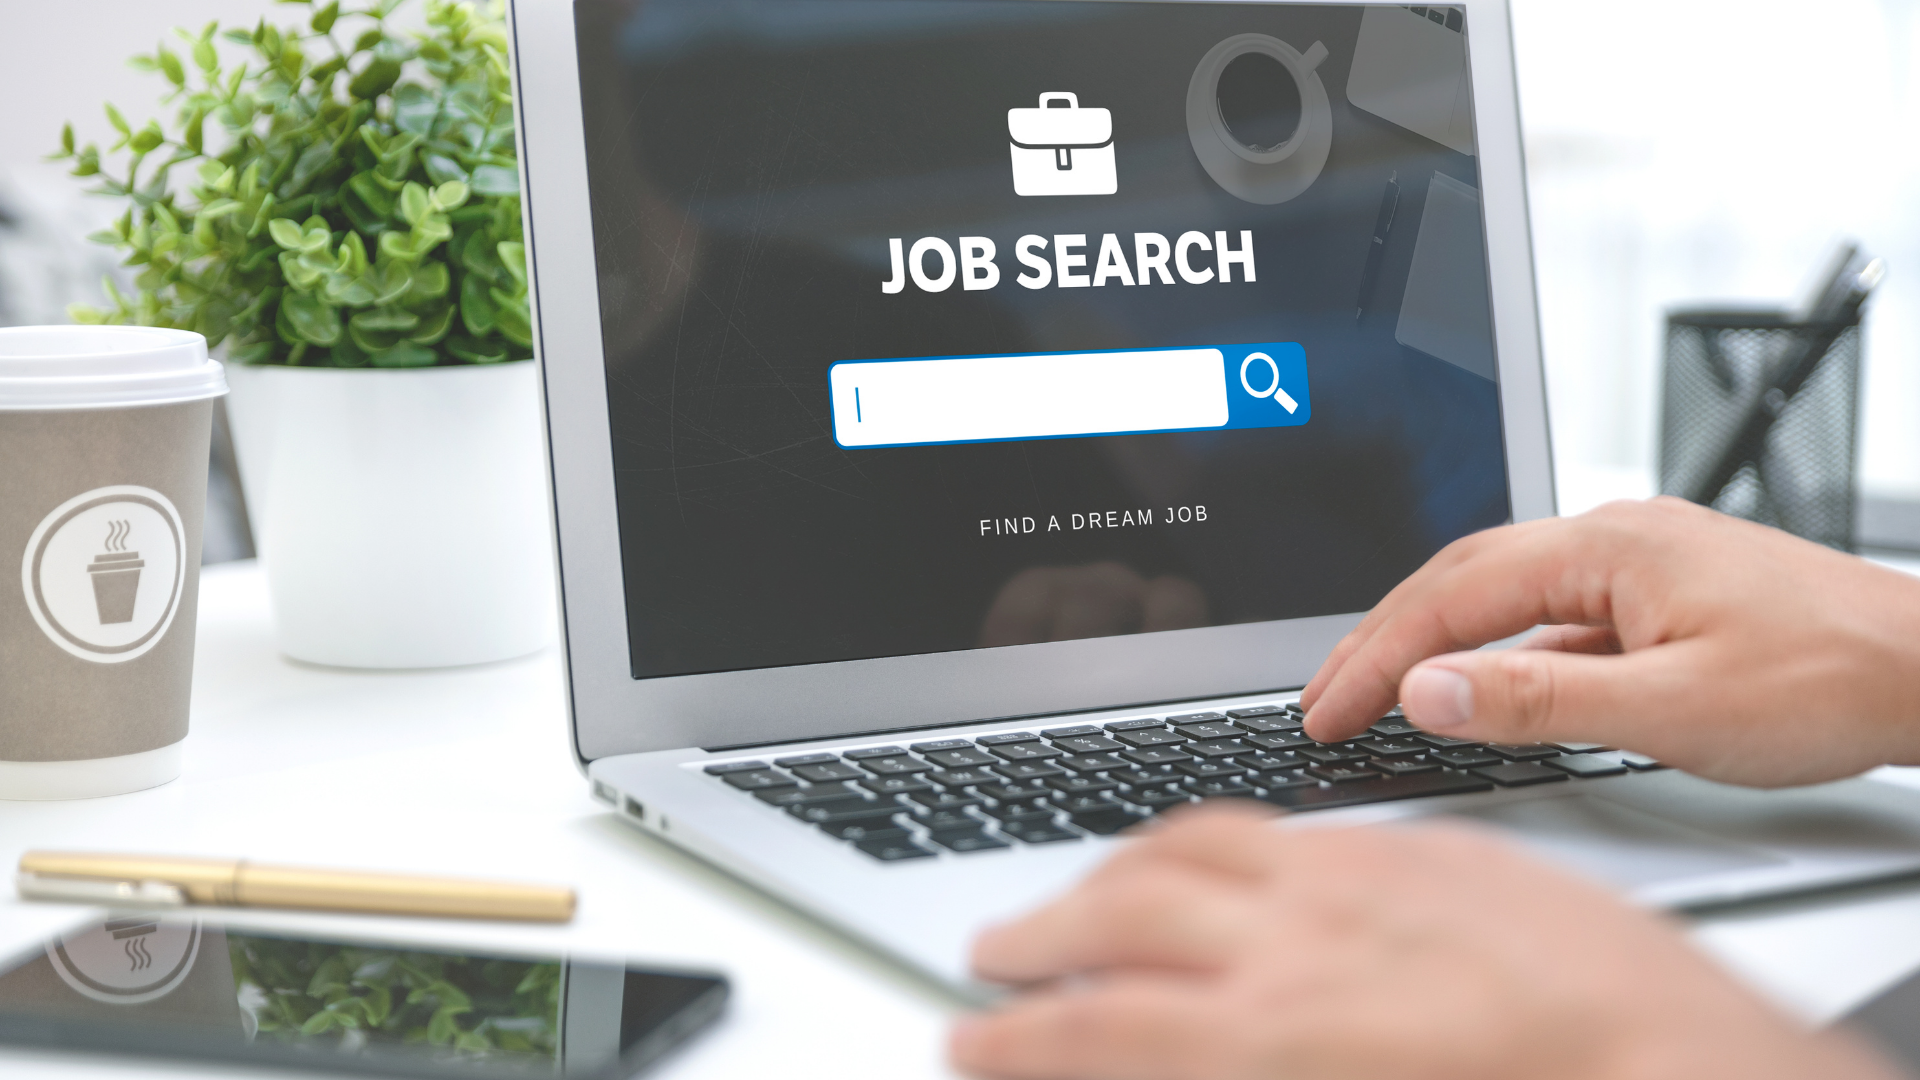 How to find a job online